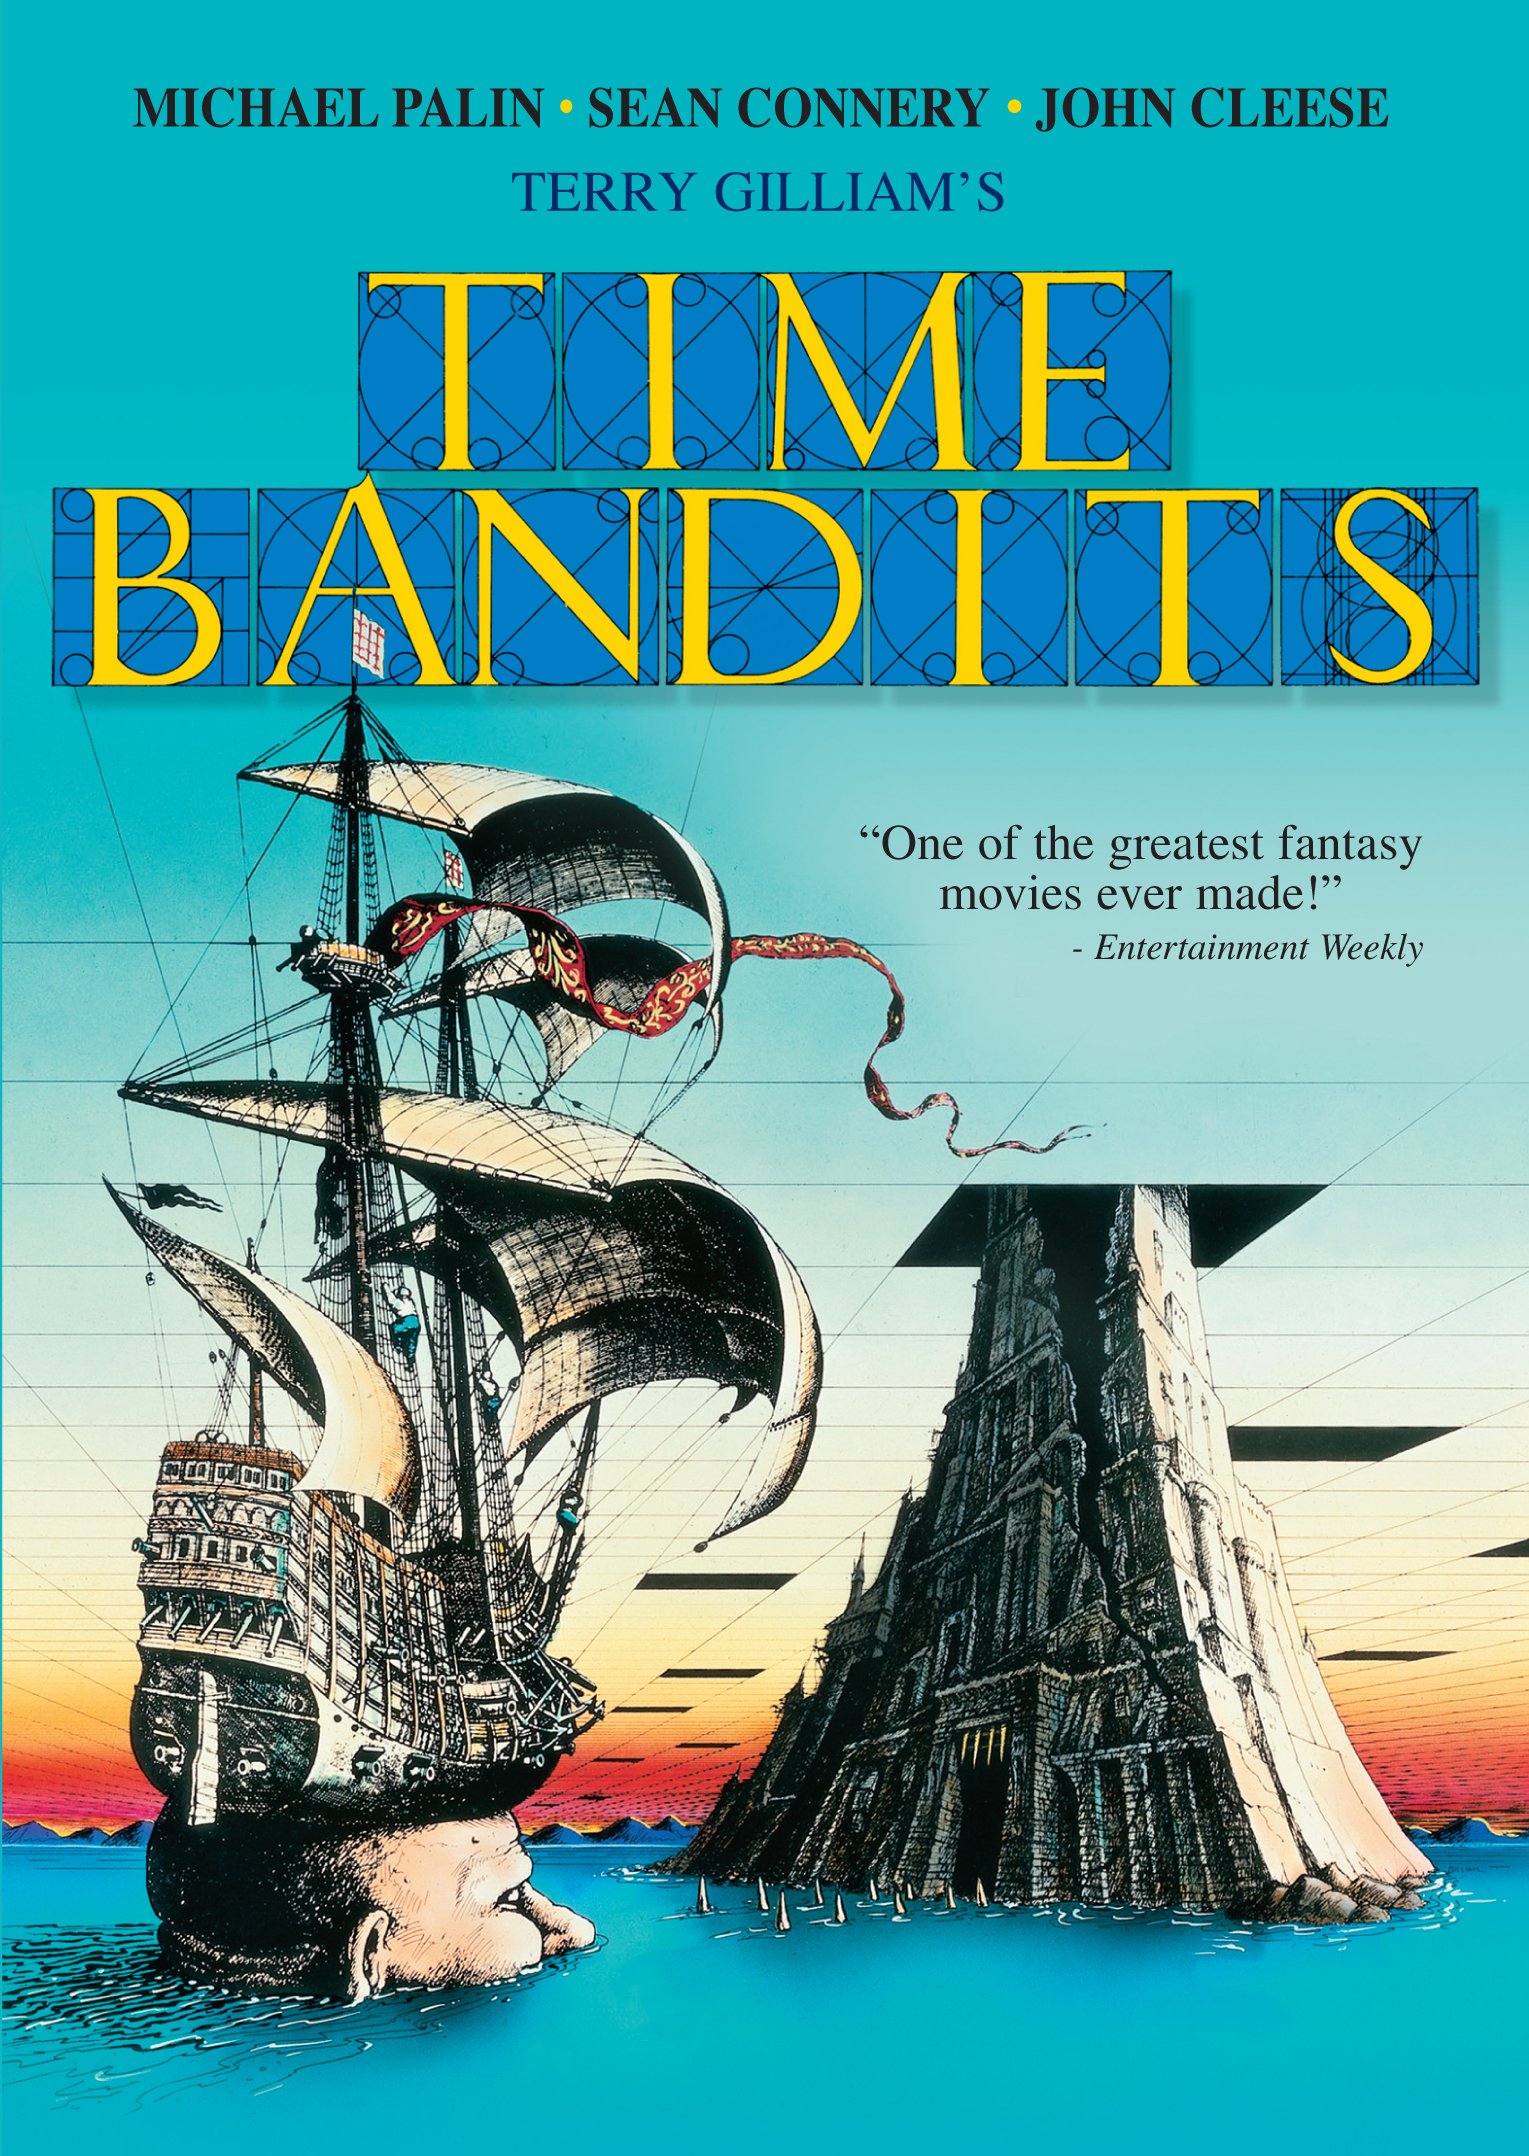 legend of the time bandit